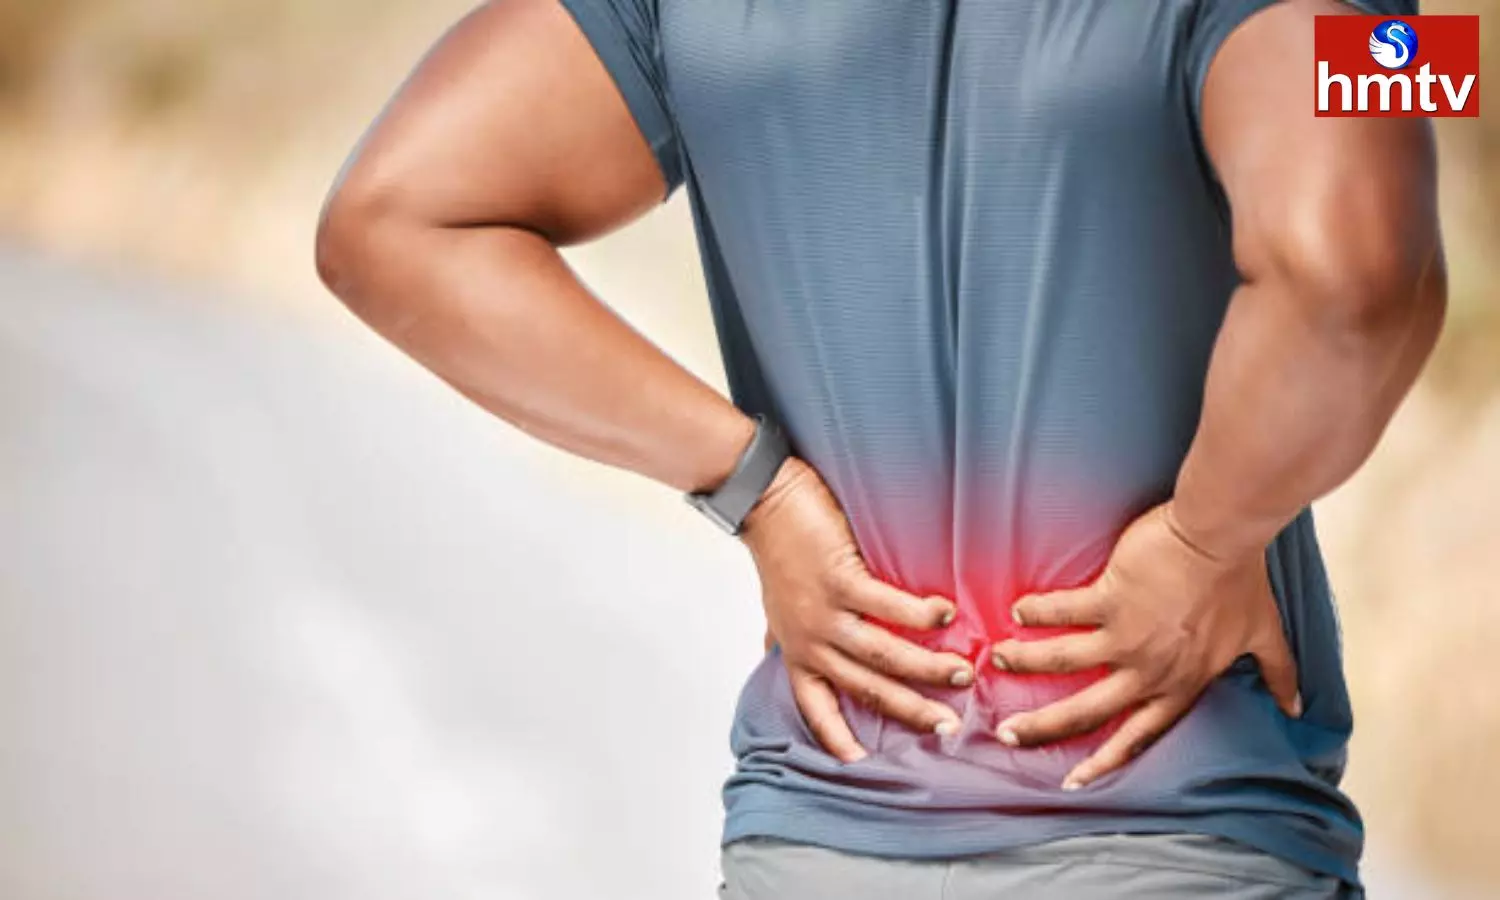 Do You Suffer From Back Pain But Find Out That There is Vitamin D Deficiency in the Body